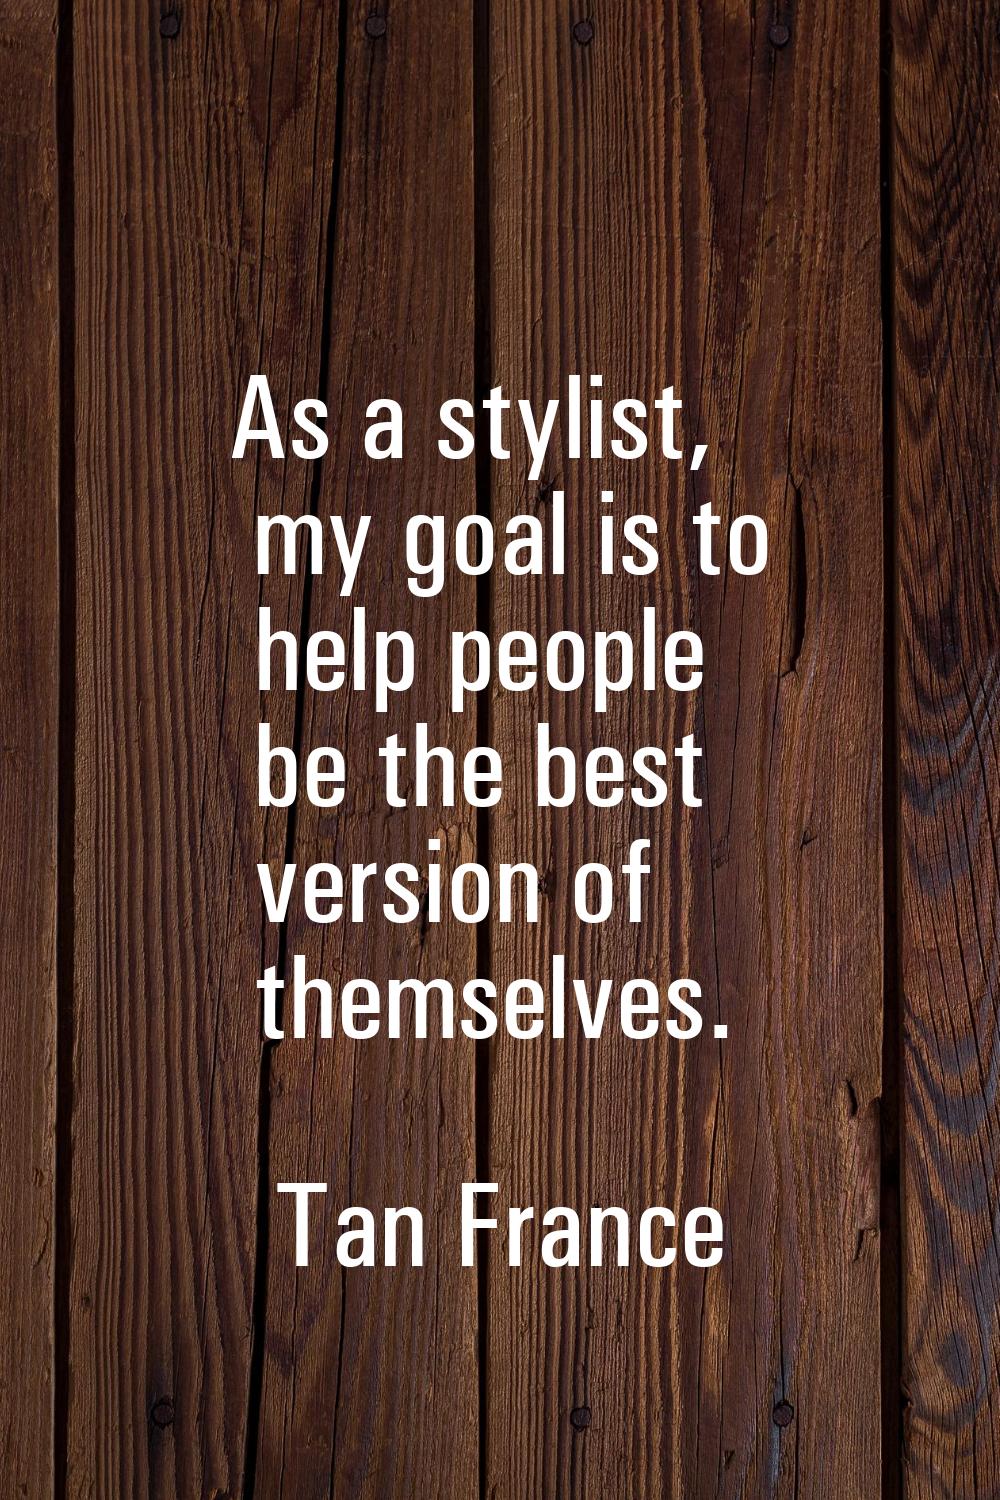 As a stylist, my goal is to help people be the best version of themselves.